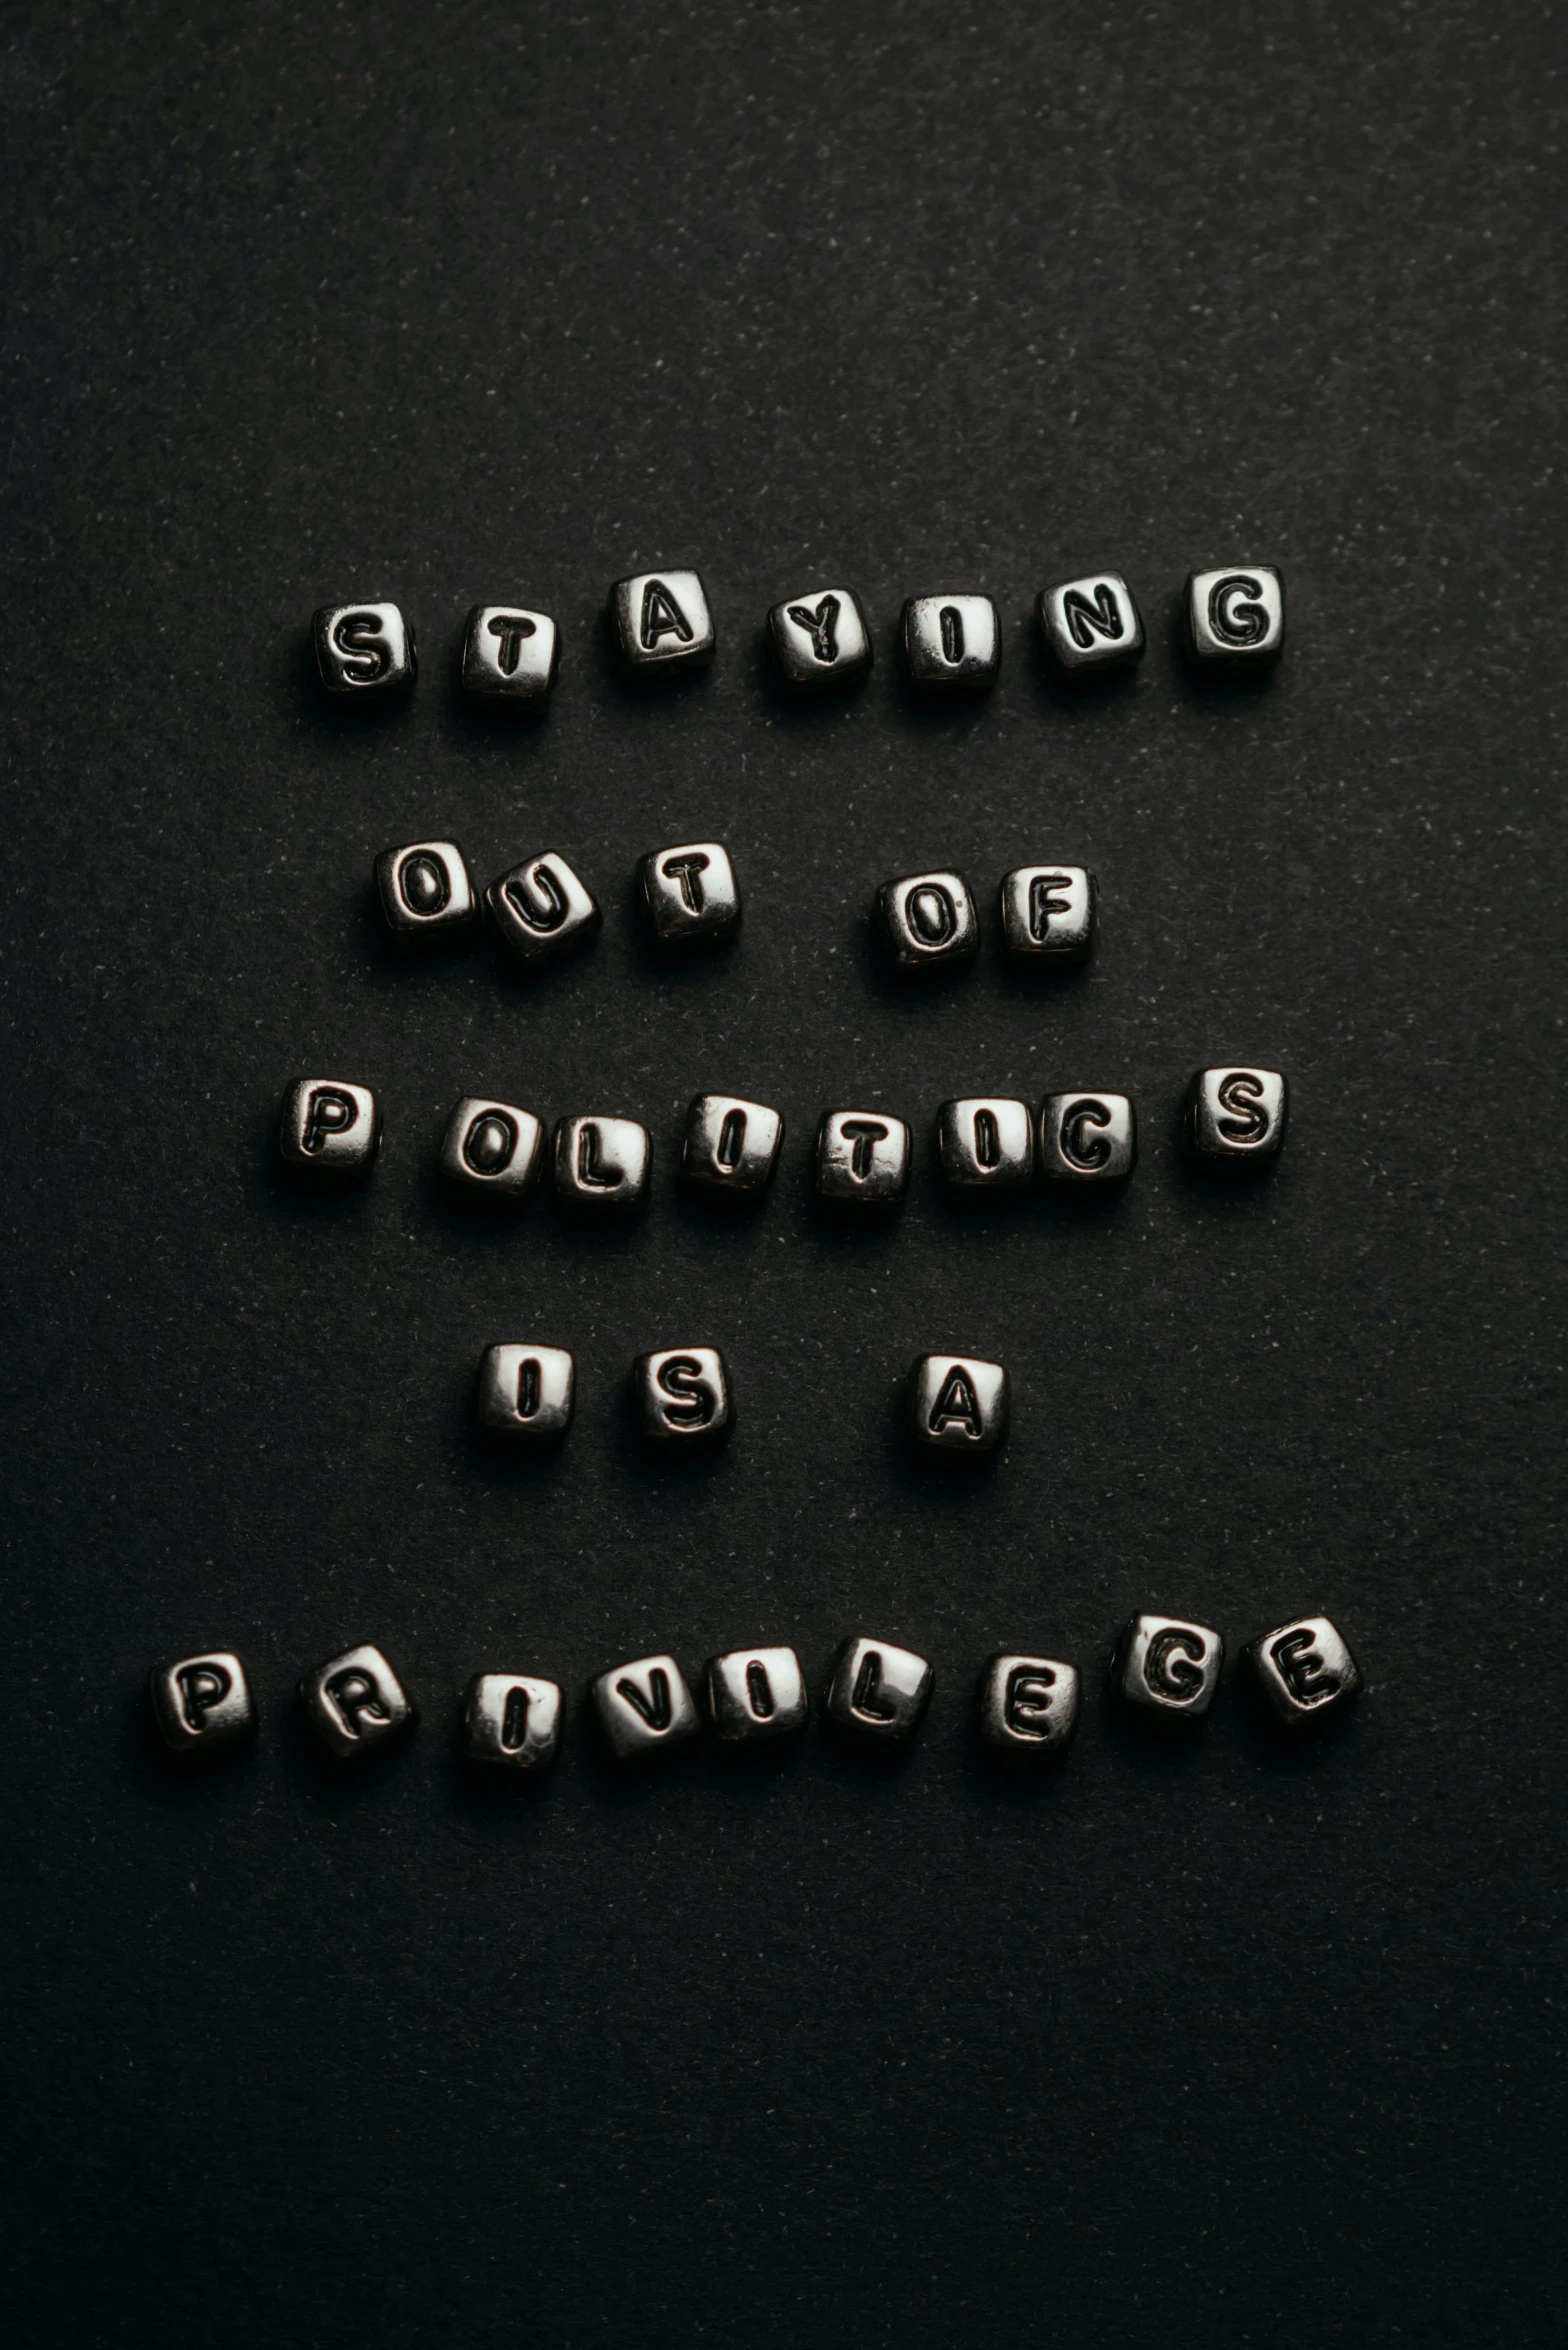 several silver letters that spell out words like q, p, d, e and f